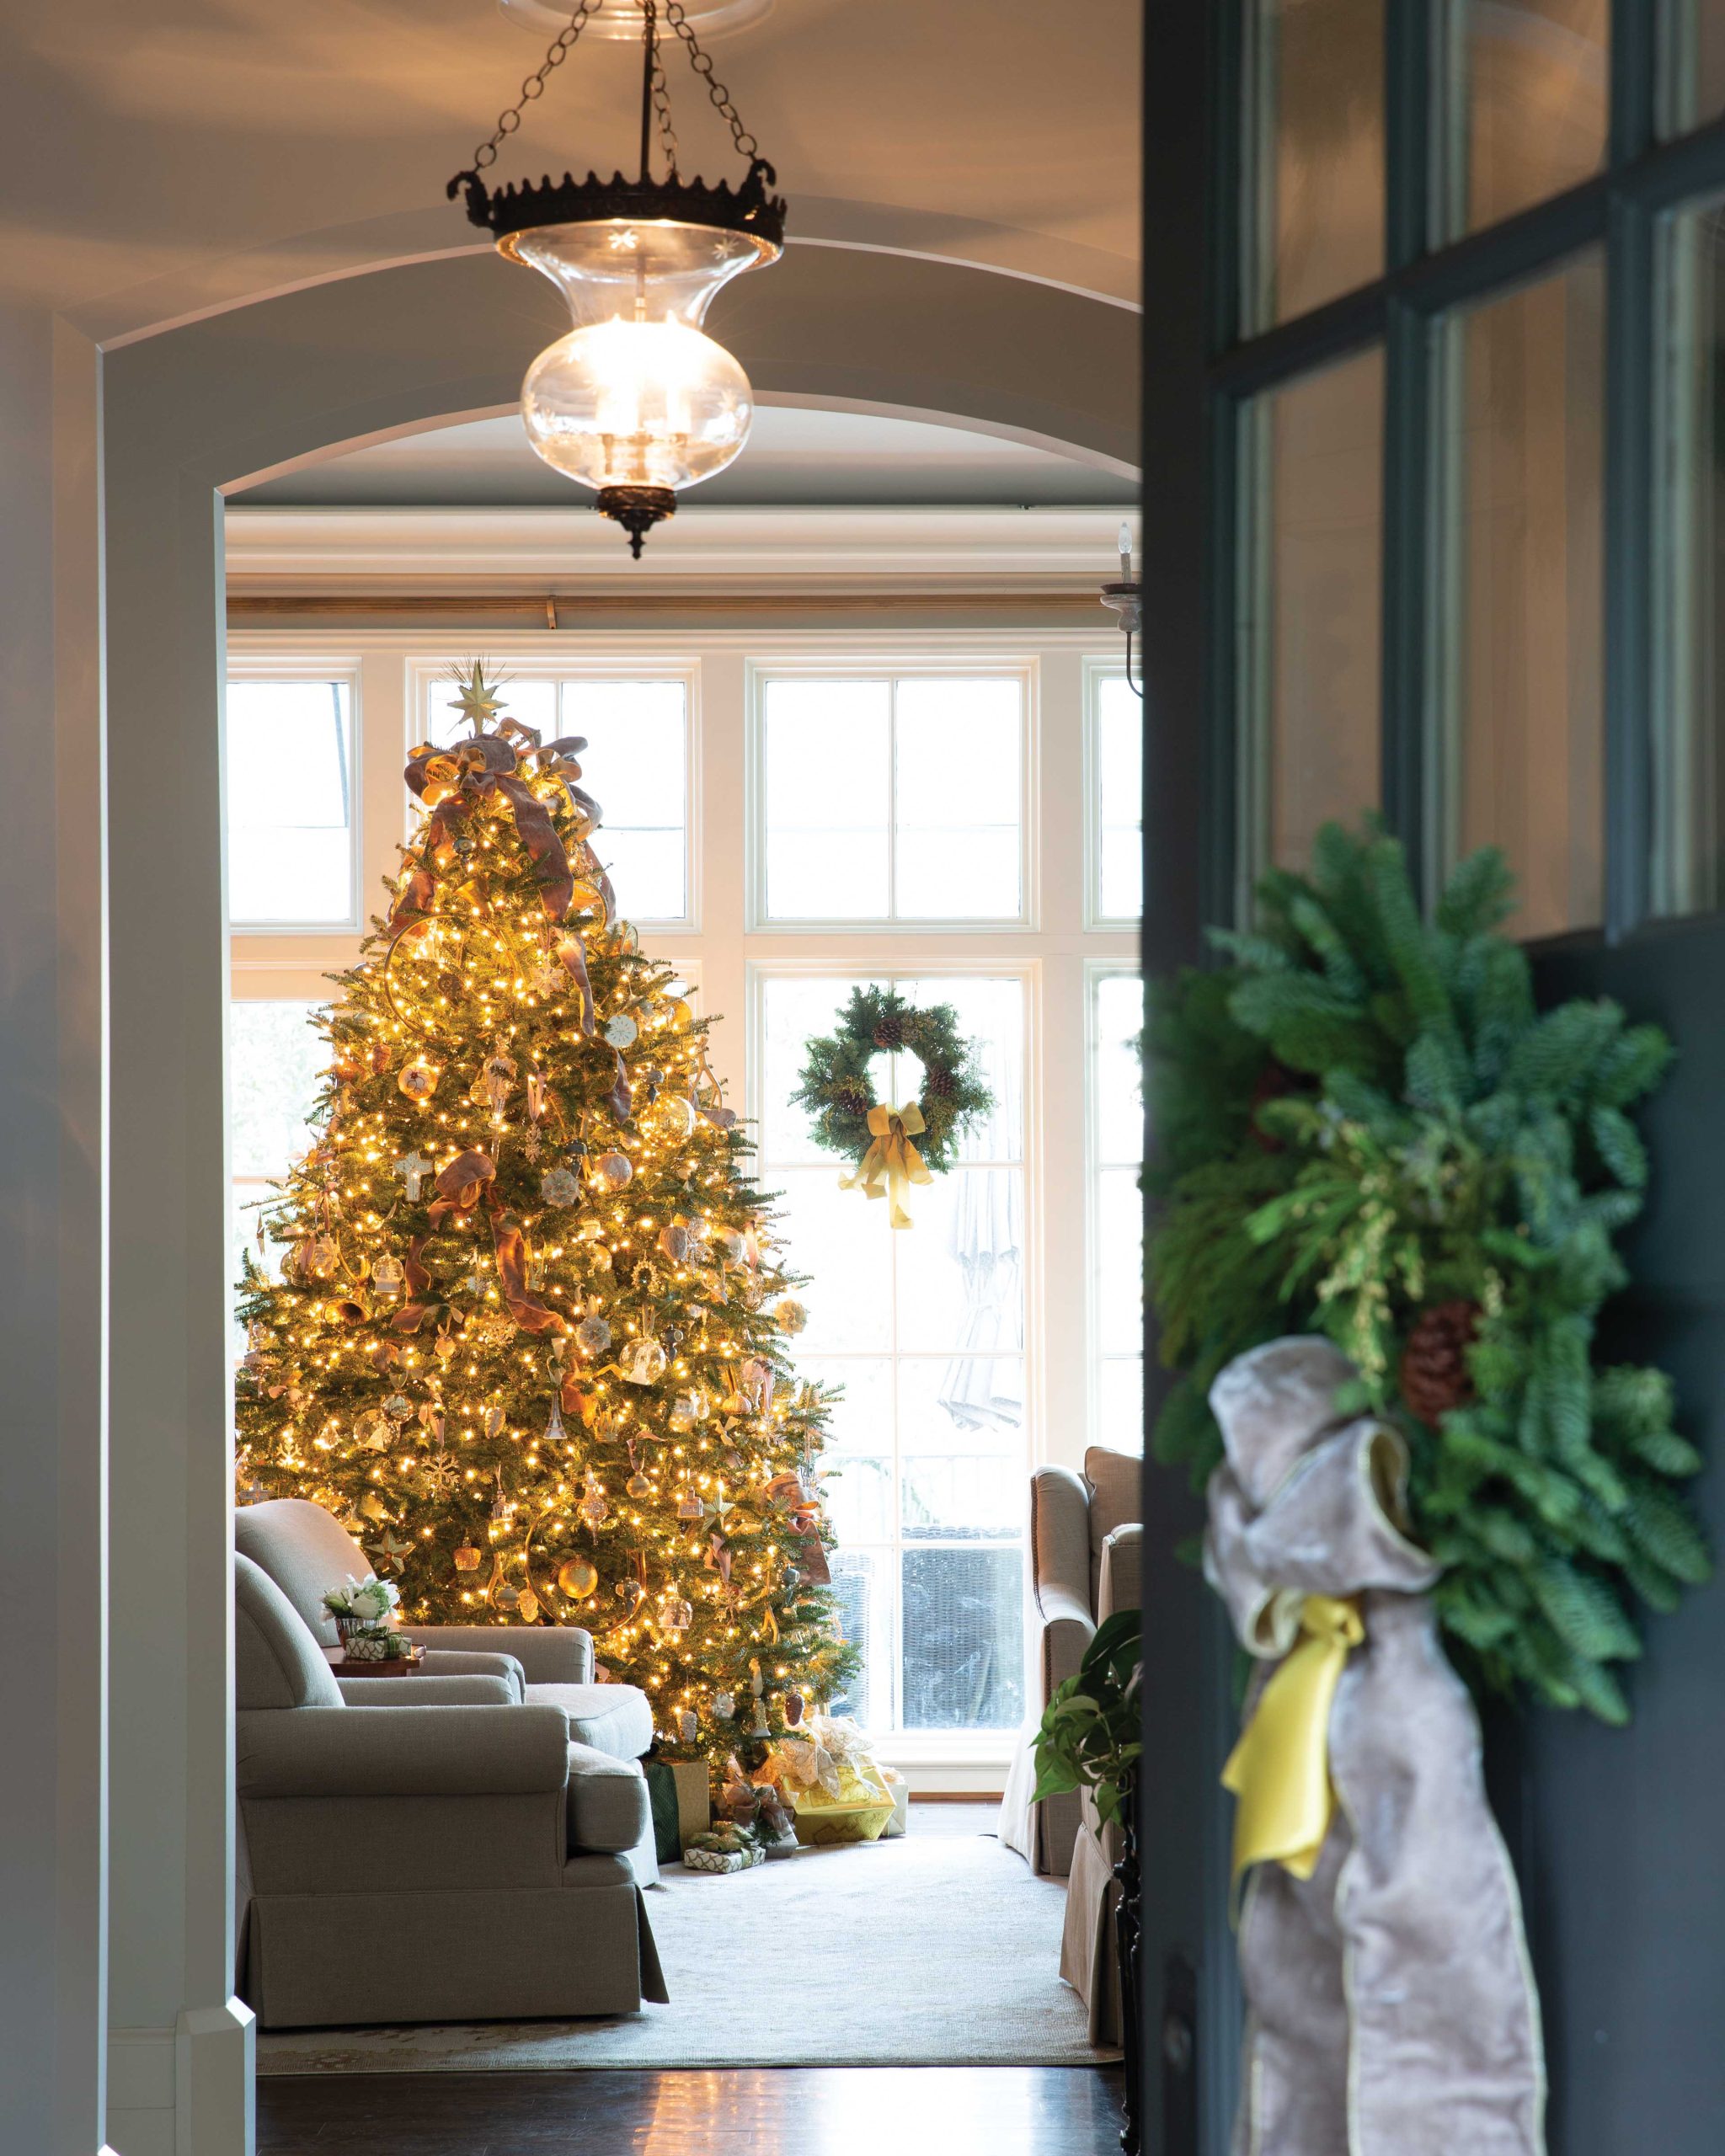 Through the front door, dressed with a beribboned wreath, the living room and its grand gold Christmas tree can be seen standing proud before a wall of windows.